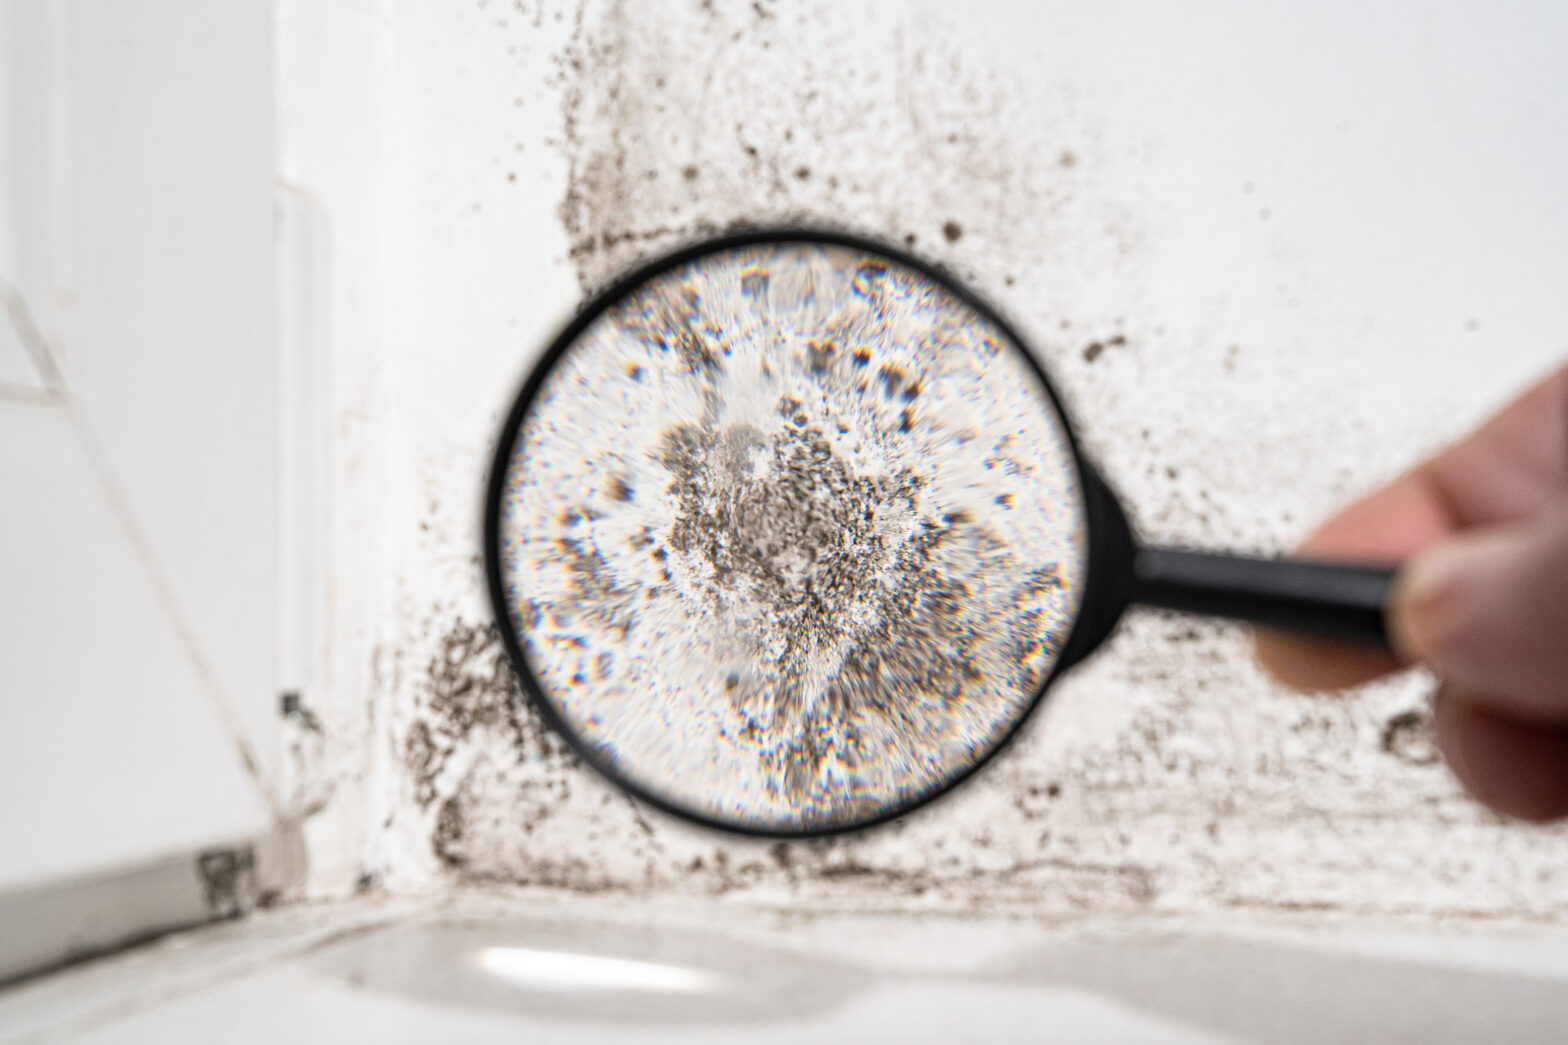 Top 10 Acts That Lead To Mold Outbreaks